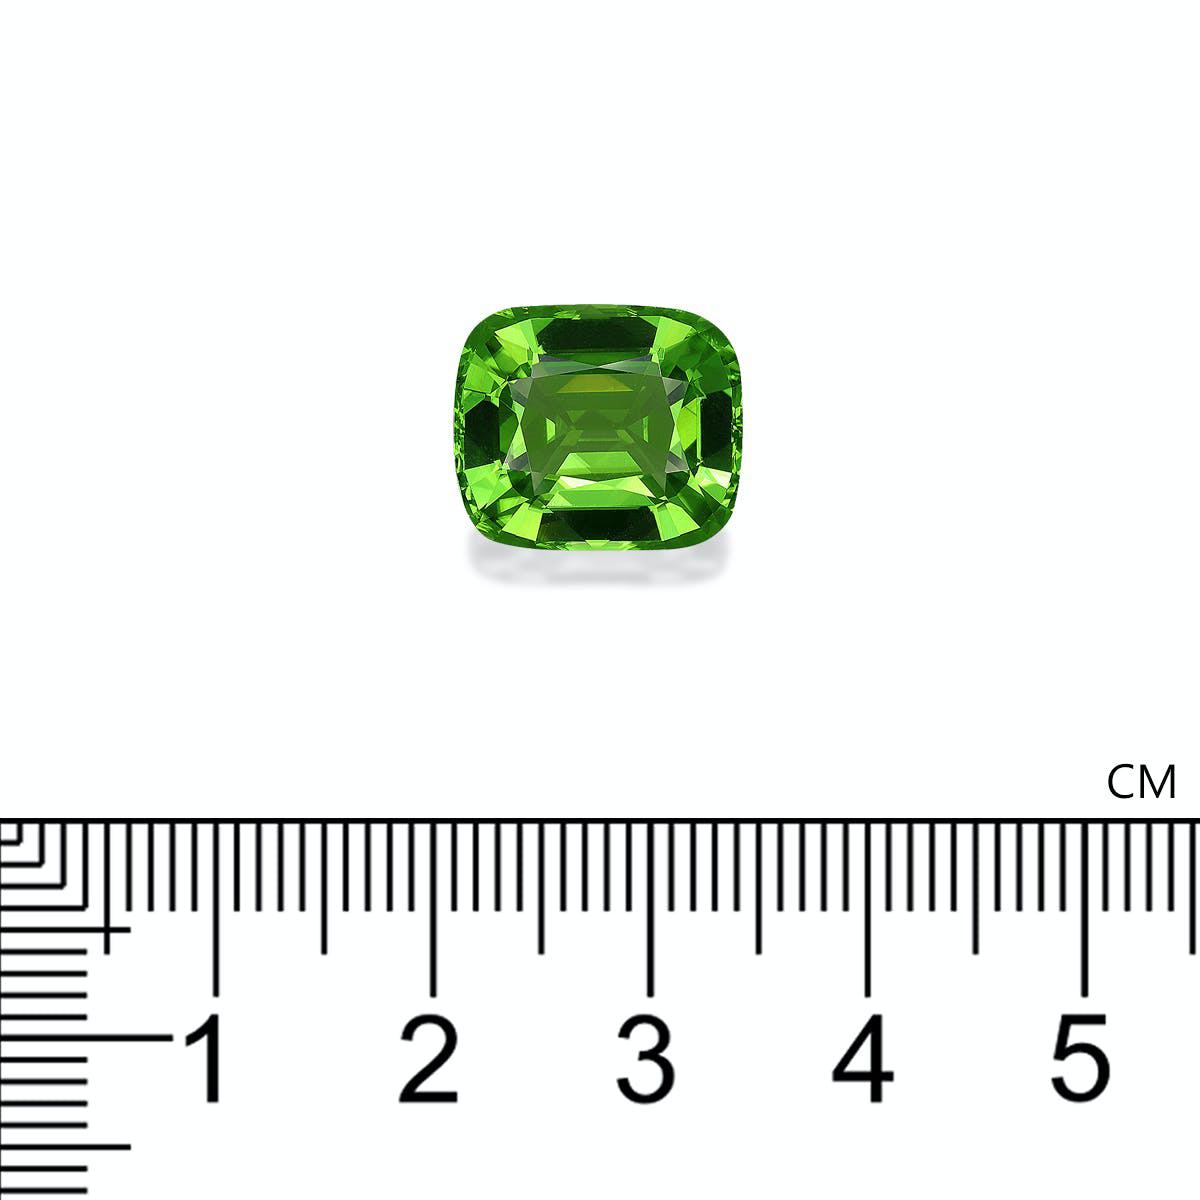 Picture of Vivid Green Peridot 8.79ct - 13x11mm (PD0307)